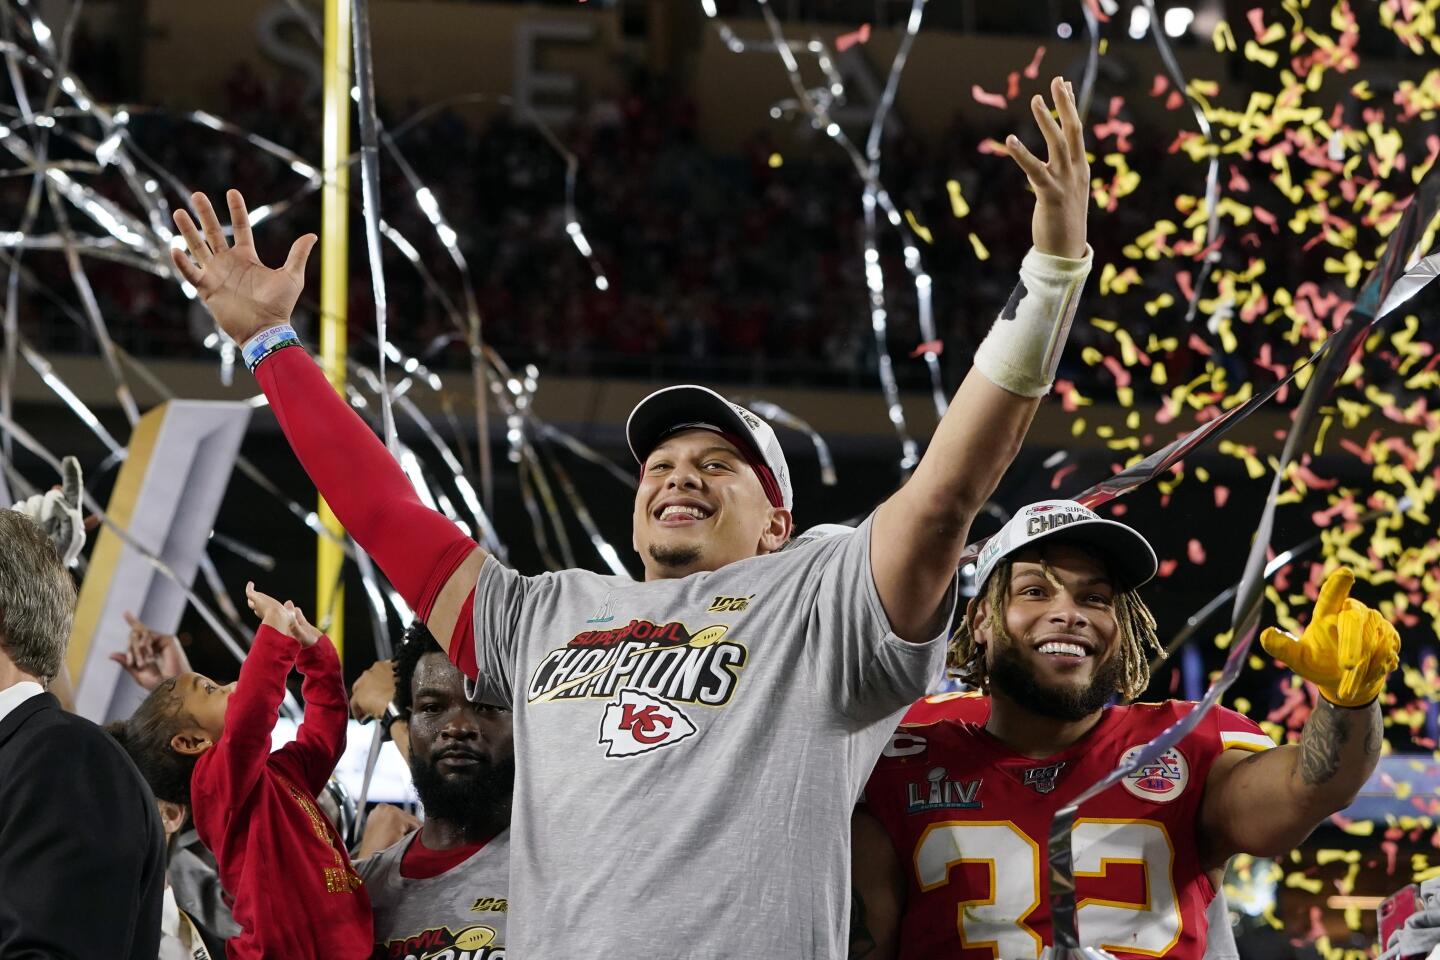 Kansas City Chiefs quarterback Patrick Mahomes, left, and teammate Tyrann Mathieu celebrate after defeating the San Francisco 49ers in Super Bowl LIV.